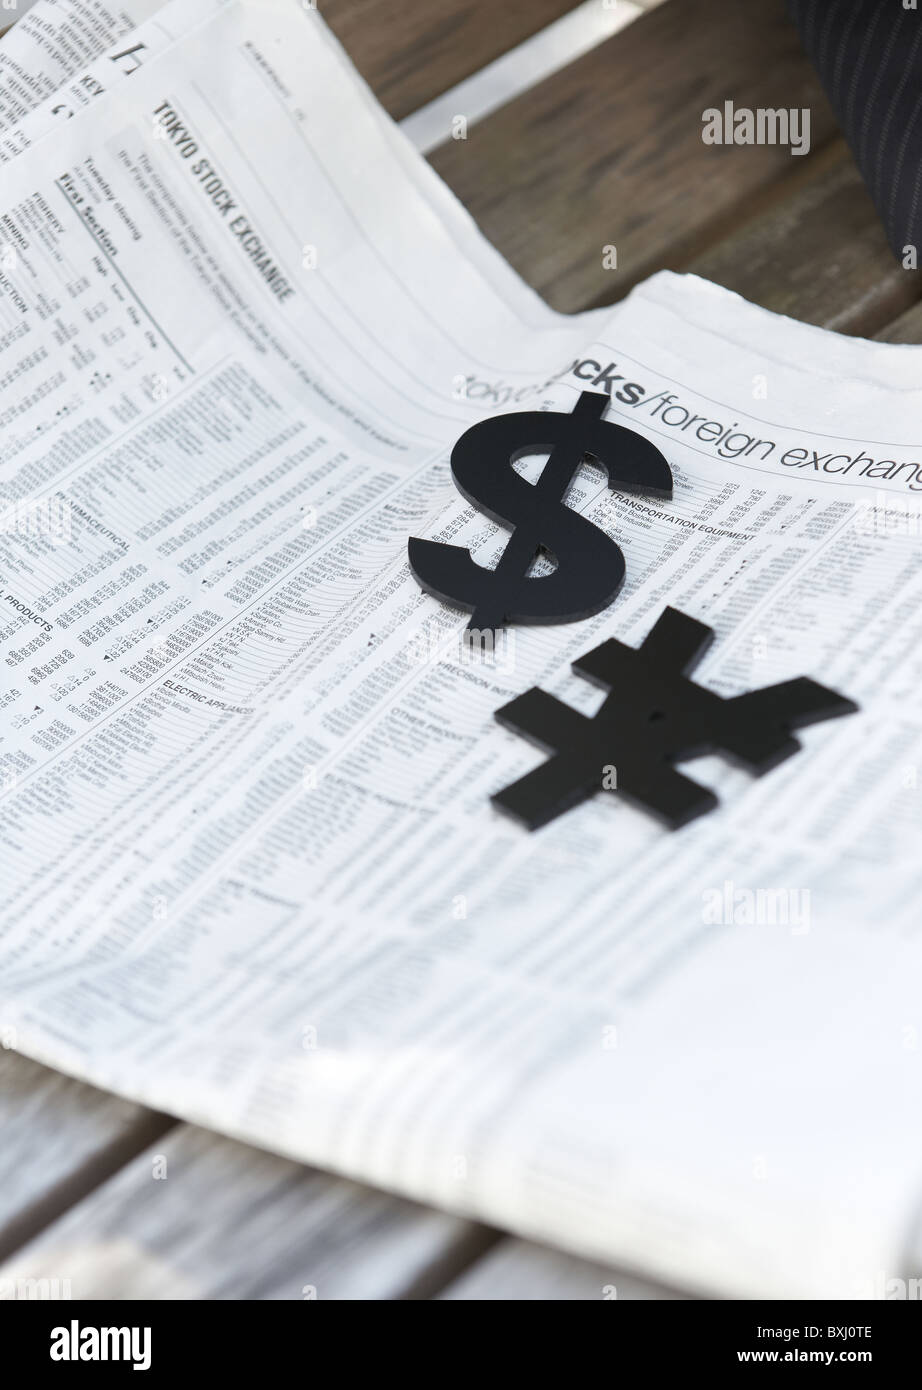 Yen sign, dollar sign, and English newspaper Stock Photo